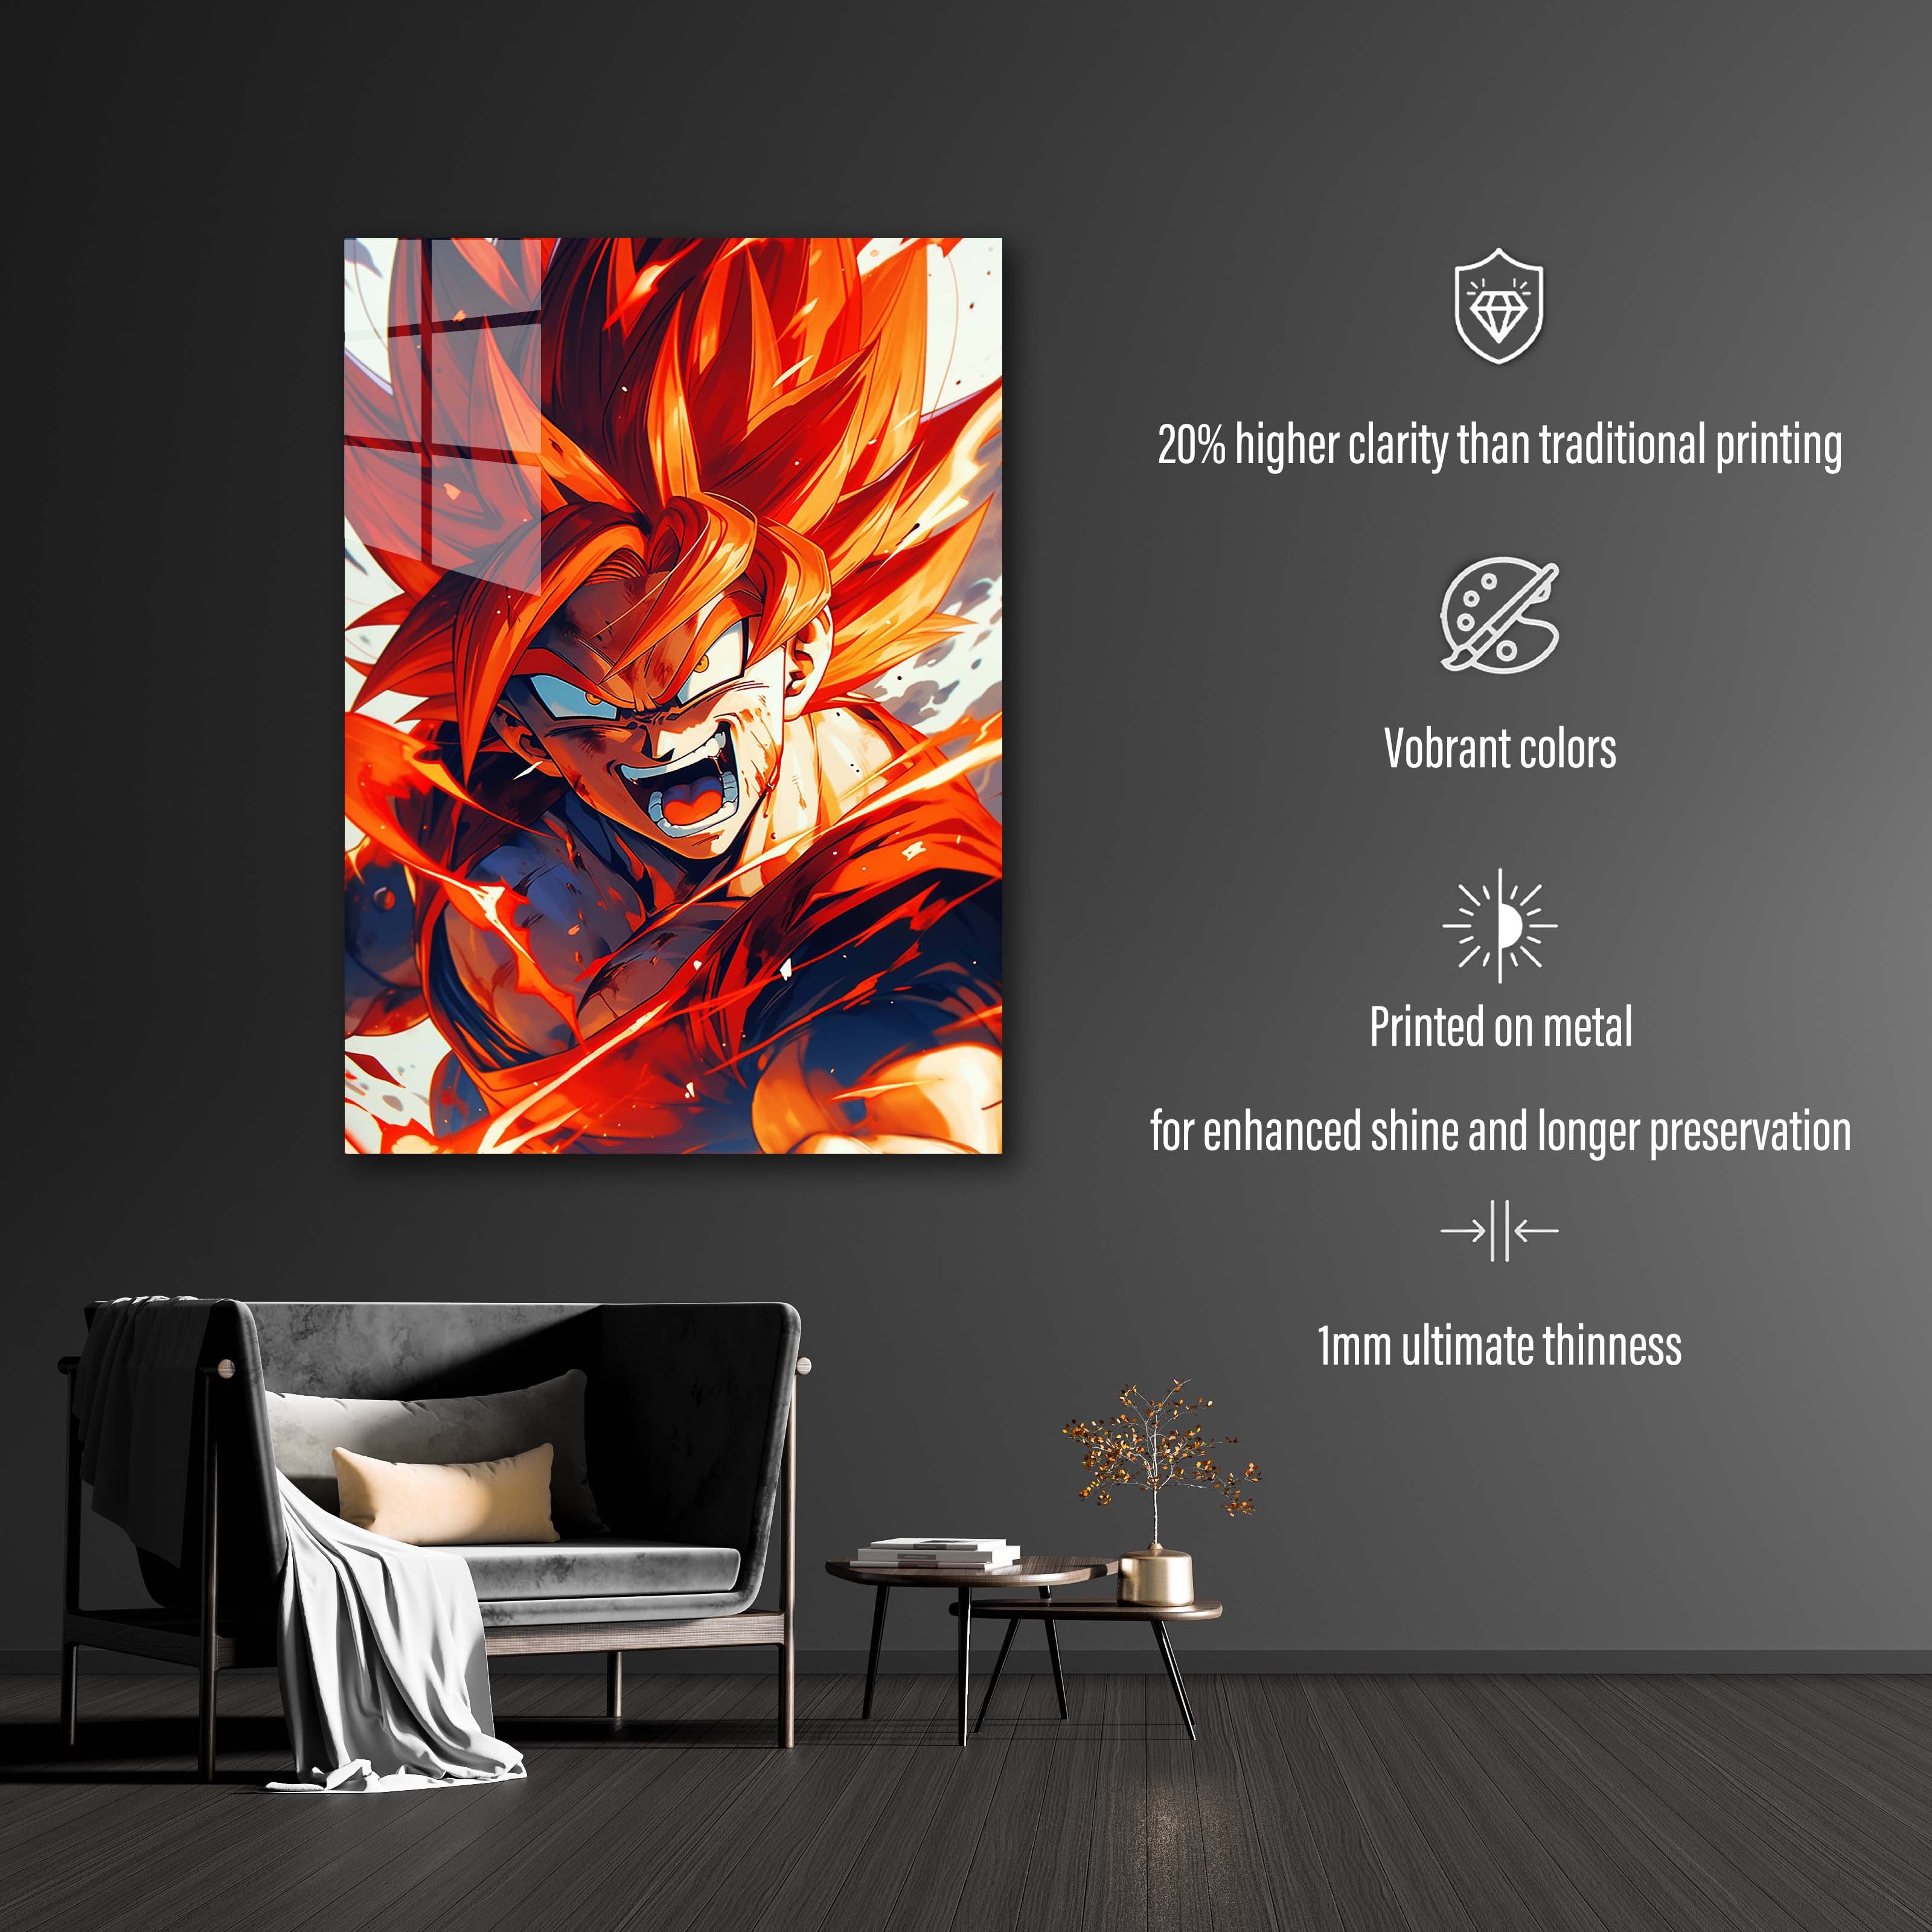 Dragon Ball Art Concept Design Animated Poster red and blue-designed by @Sawyer